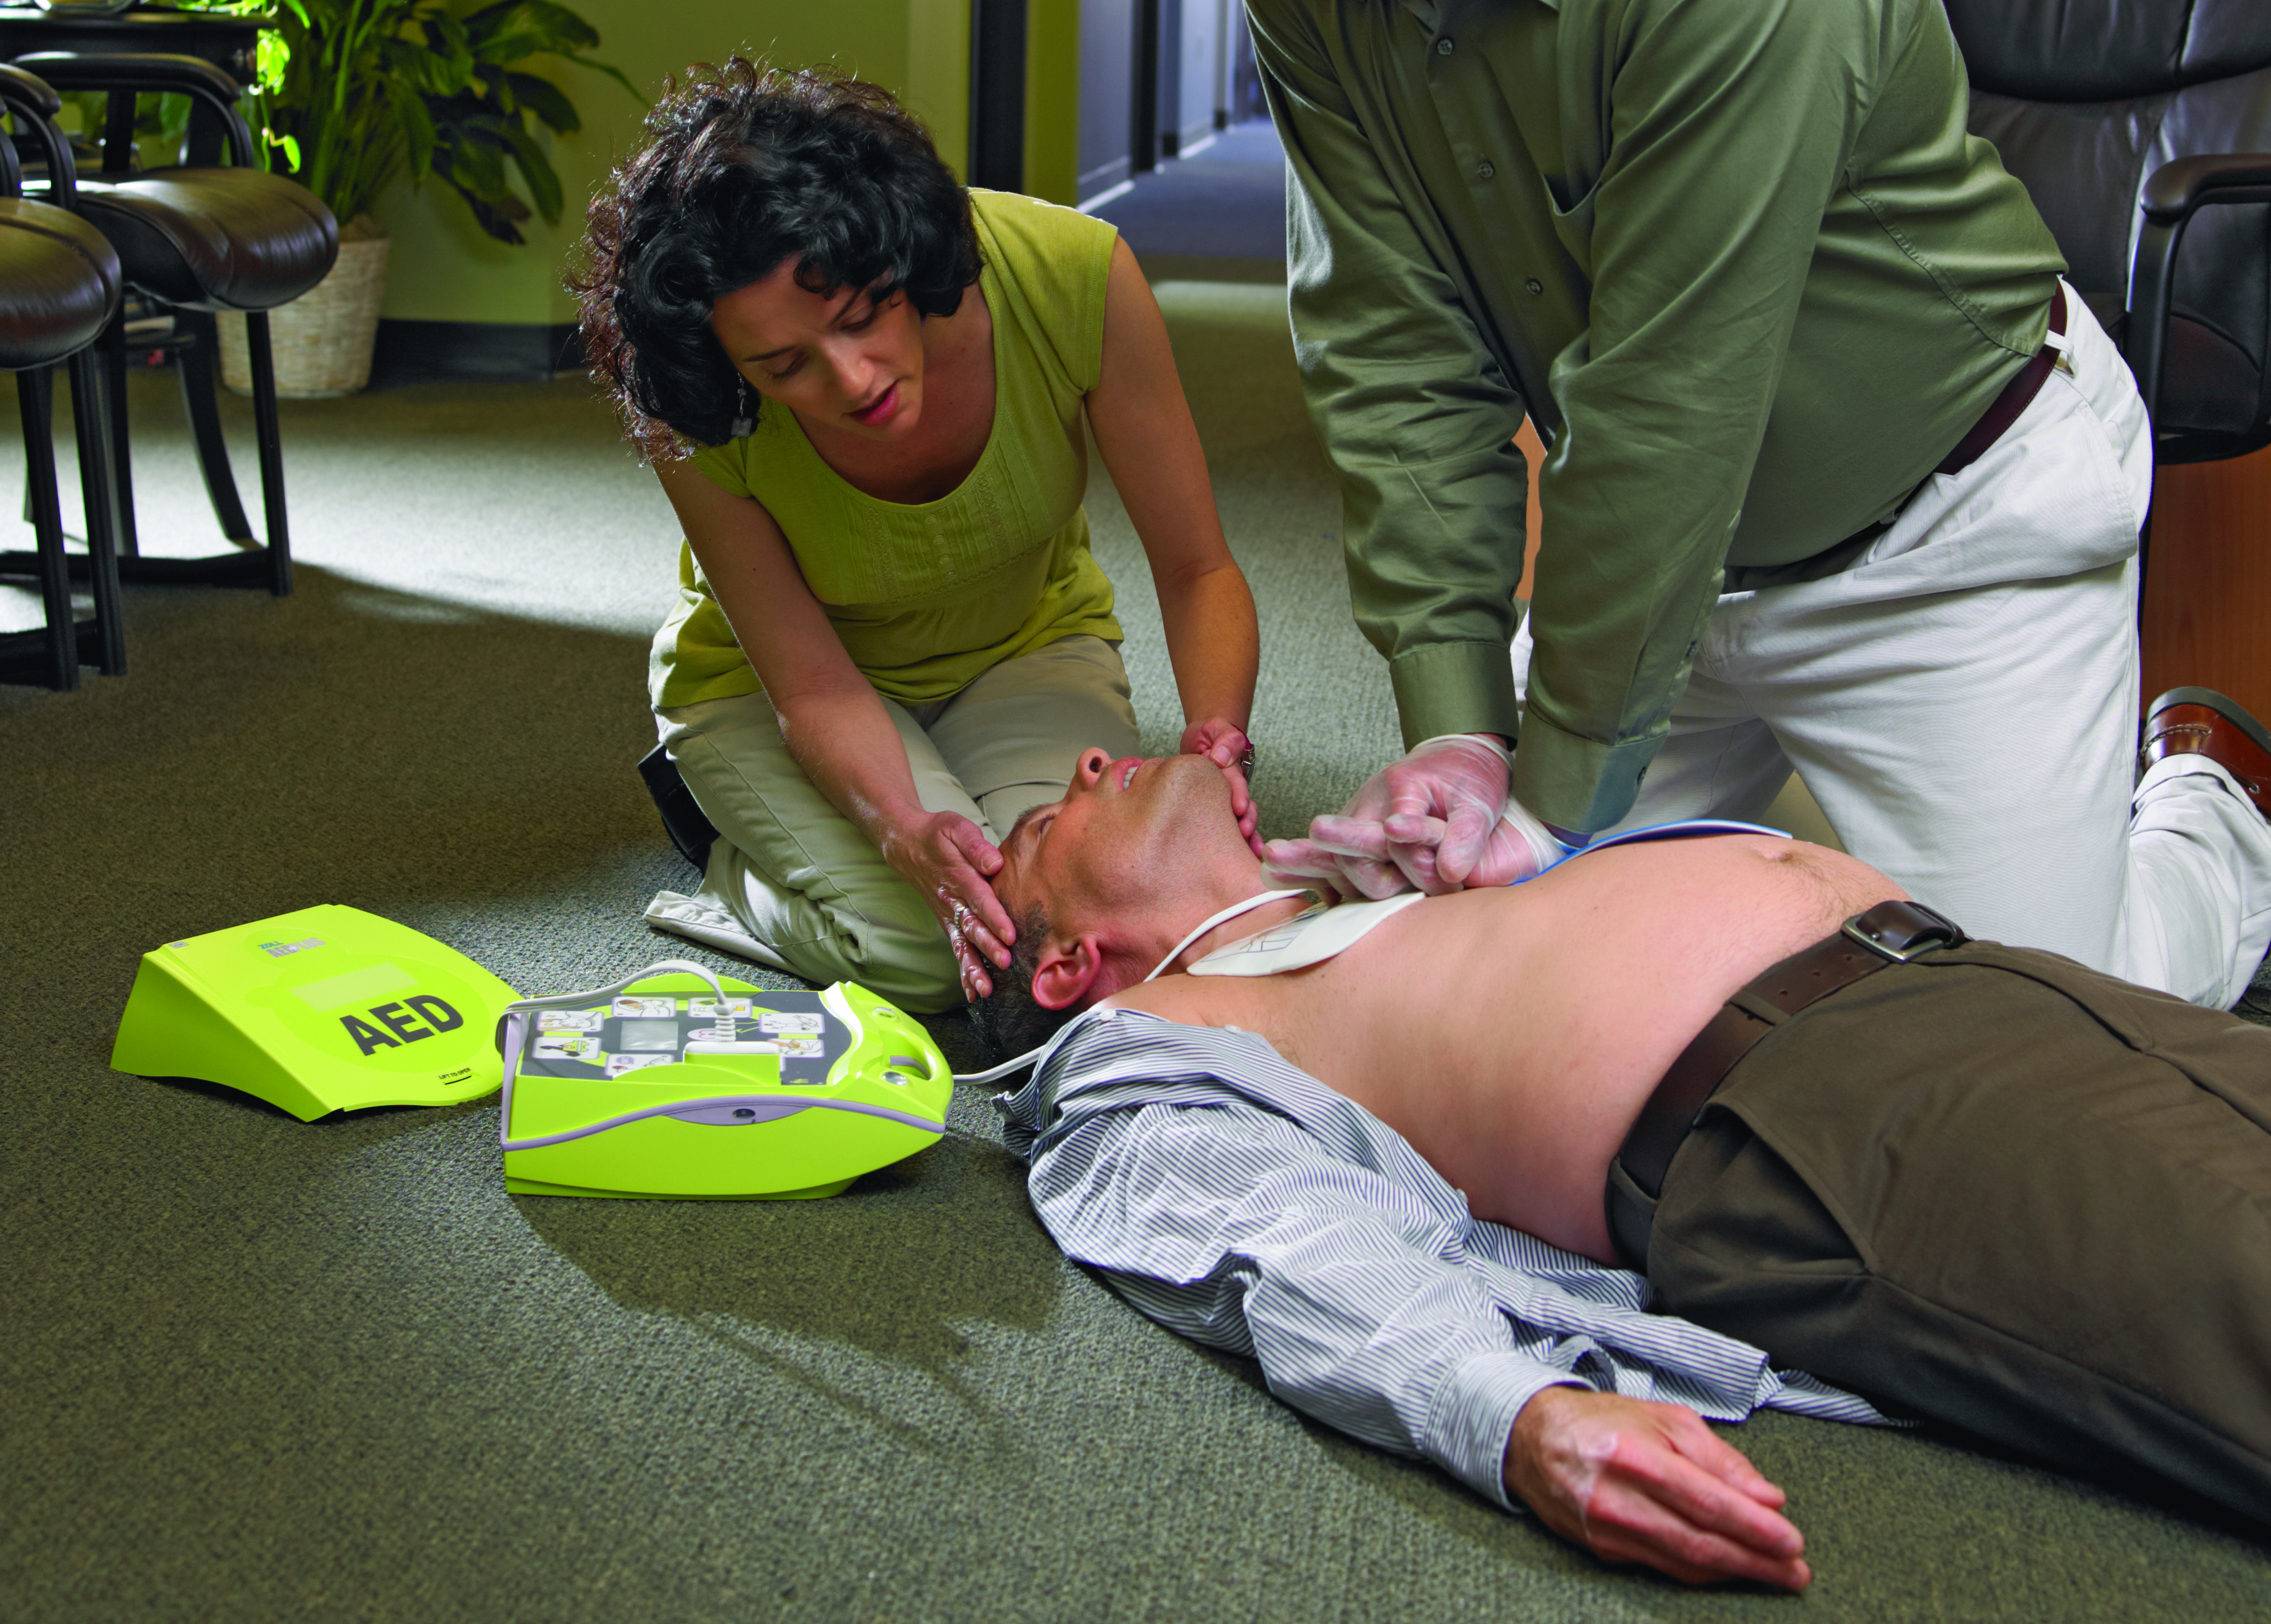 CPR & AED Awareness Week: 5 Ways to Get Involved